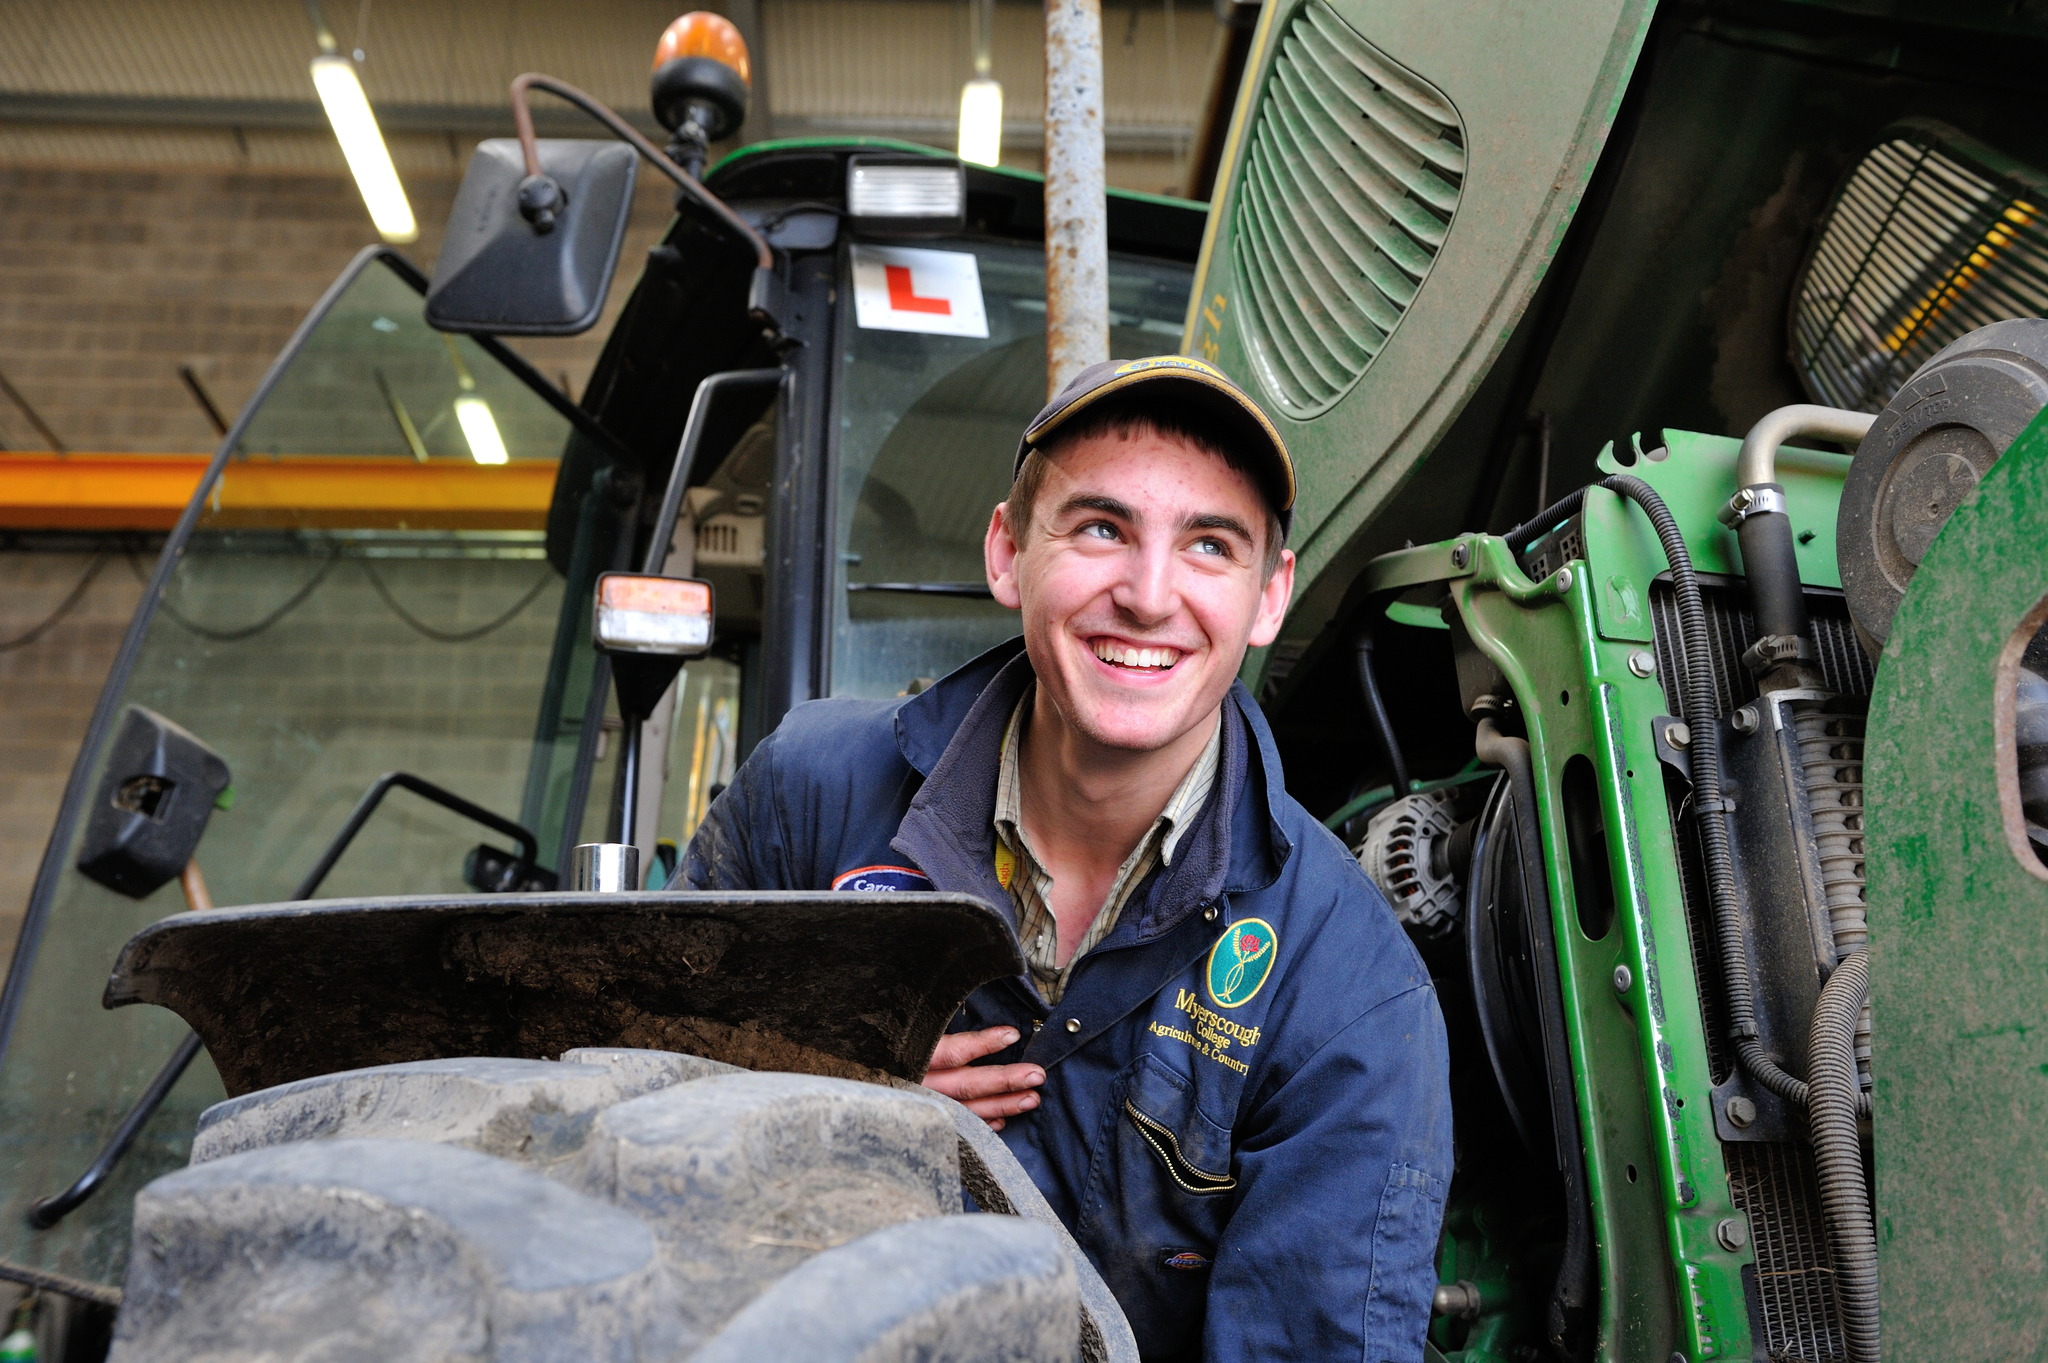 Myerscough College Agriculture student inspects a tractor